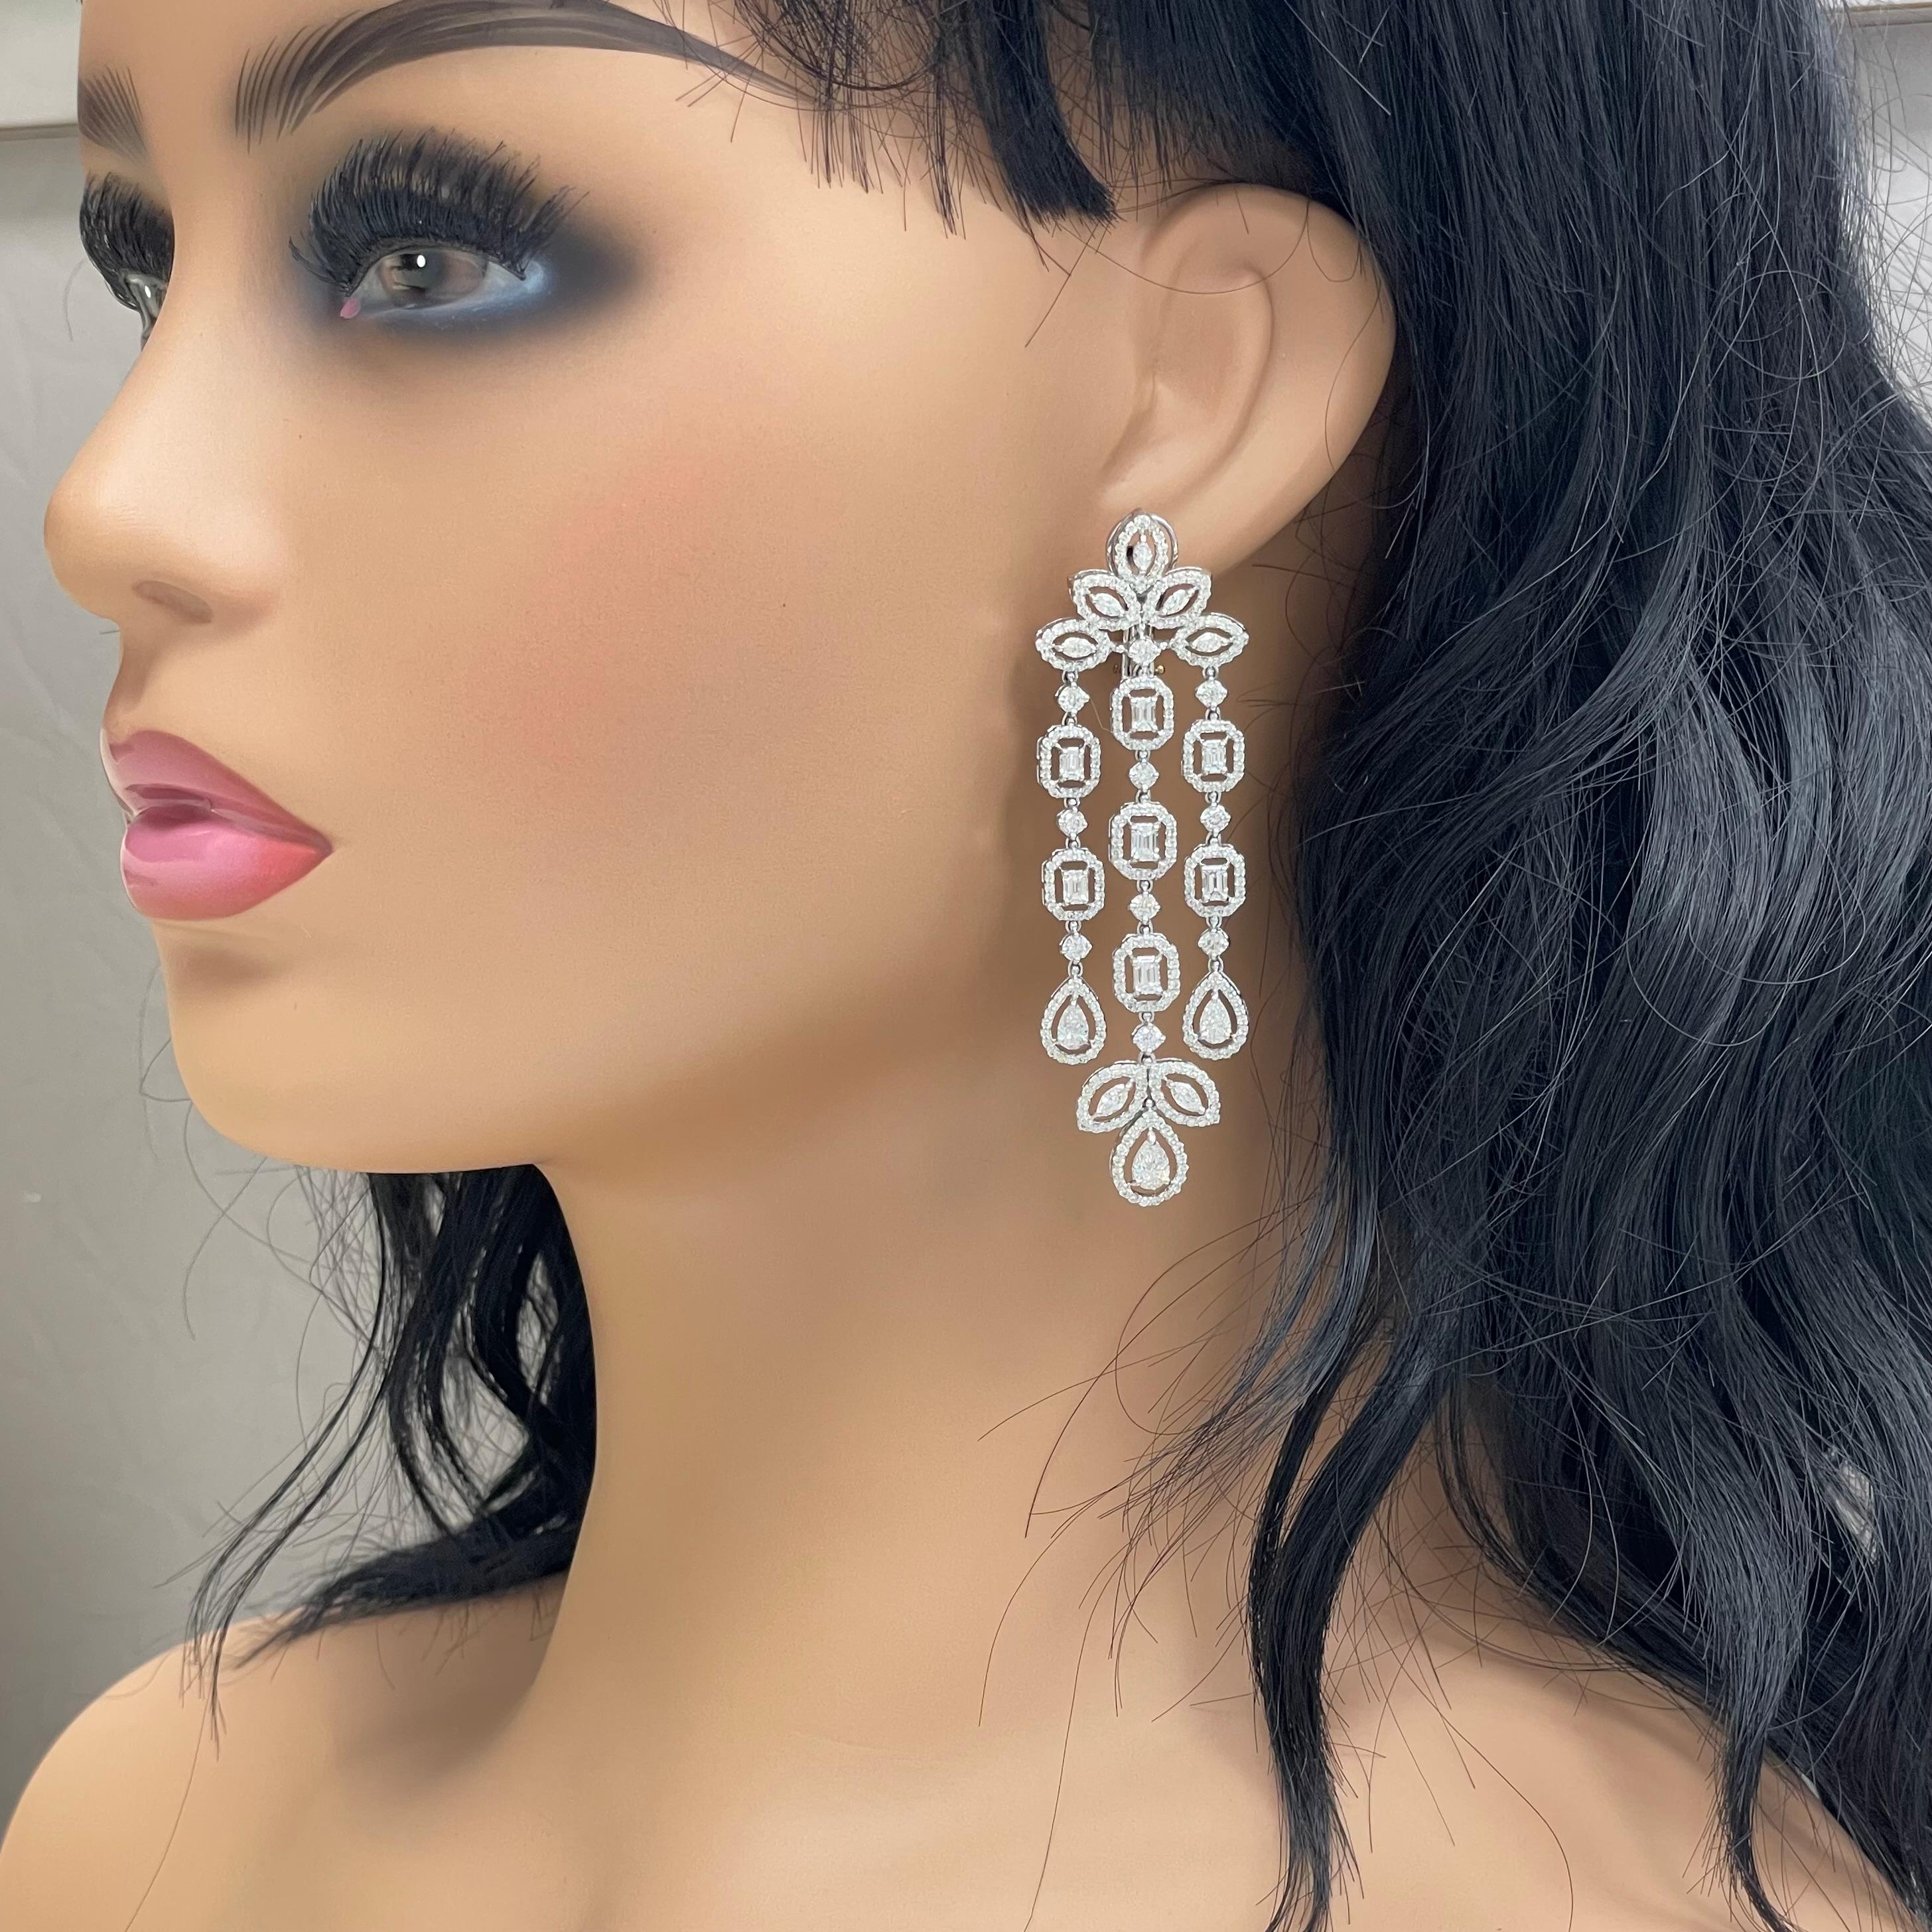 The Beauvince Legacy diamond earrings feature a important and emphatic design befitting a queen. The over-sized chandelier earrings are stated, royal & elegant. 

Diamonds Shapes: Pear Shape, Marquise, Emerald & Round 
Total Diamonds Weight: 8.55